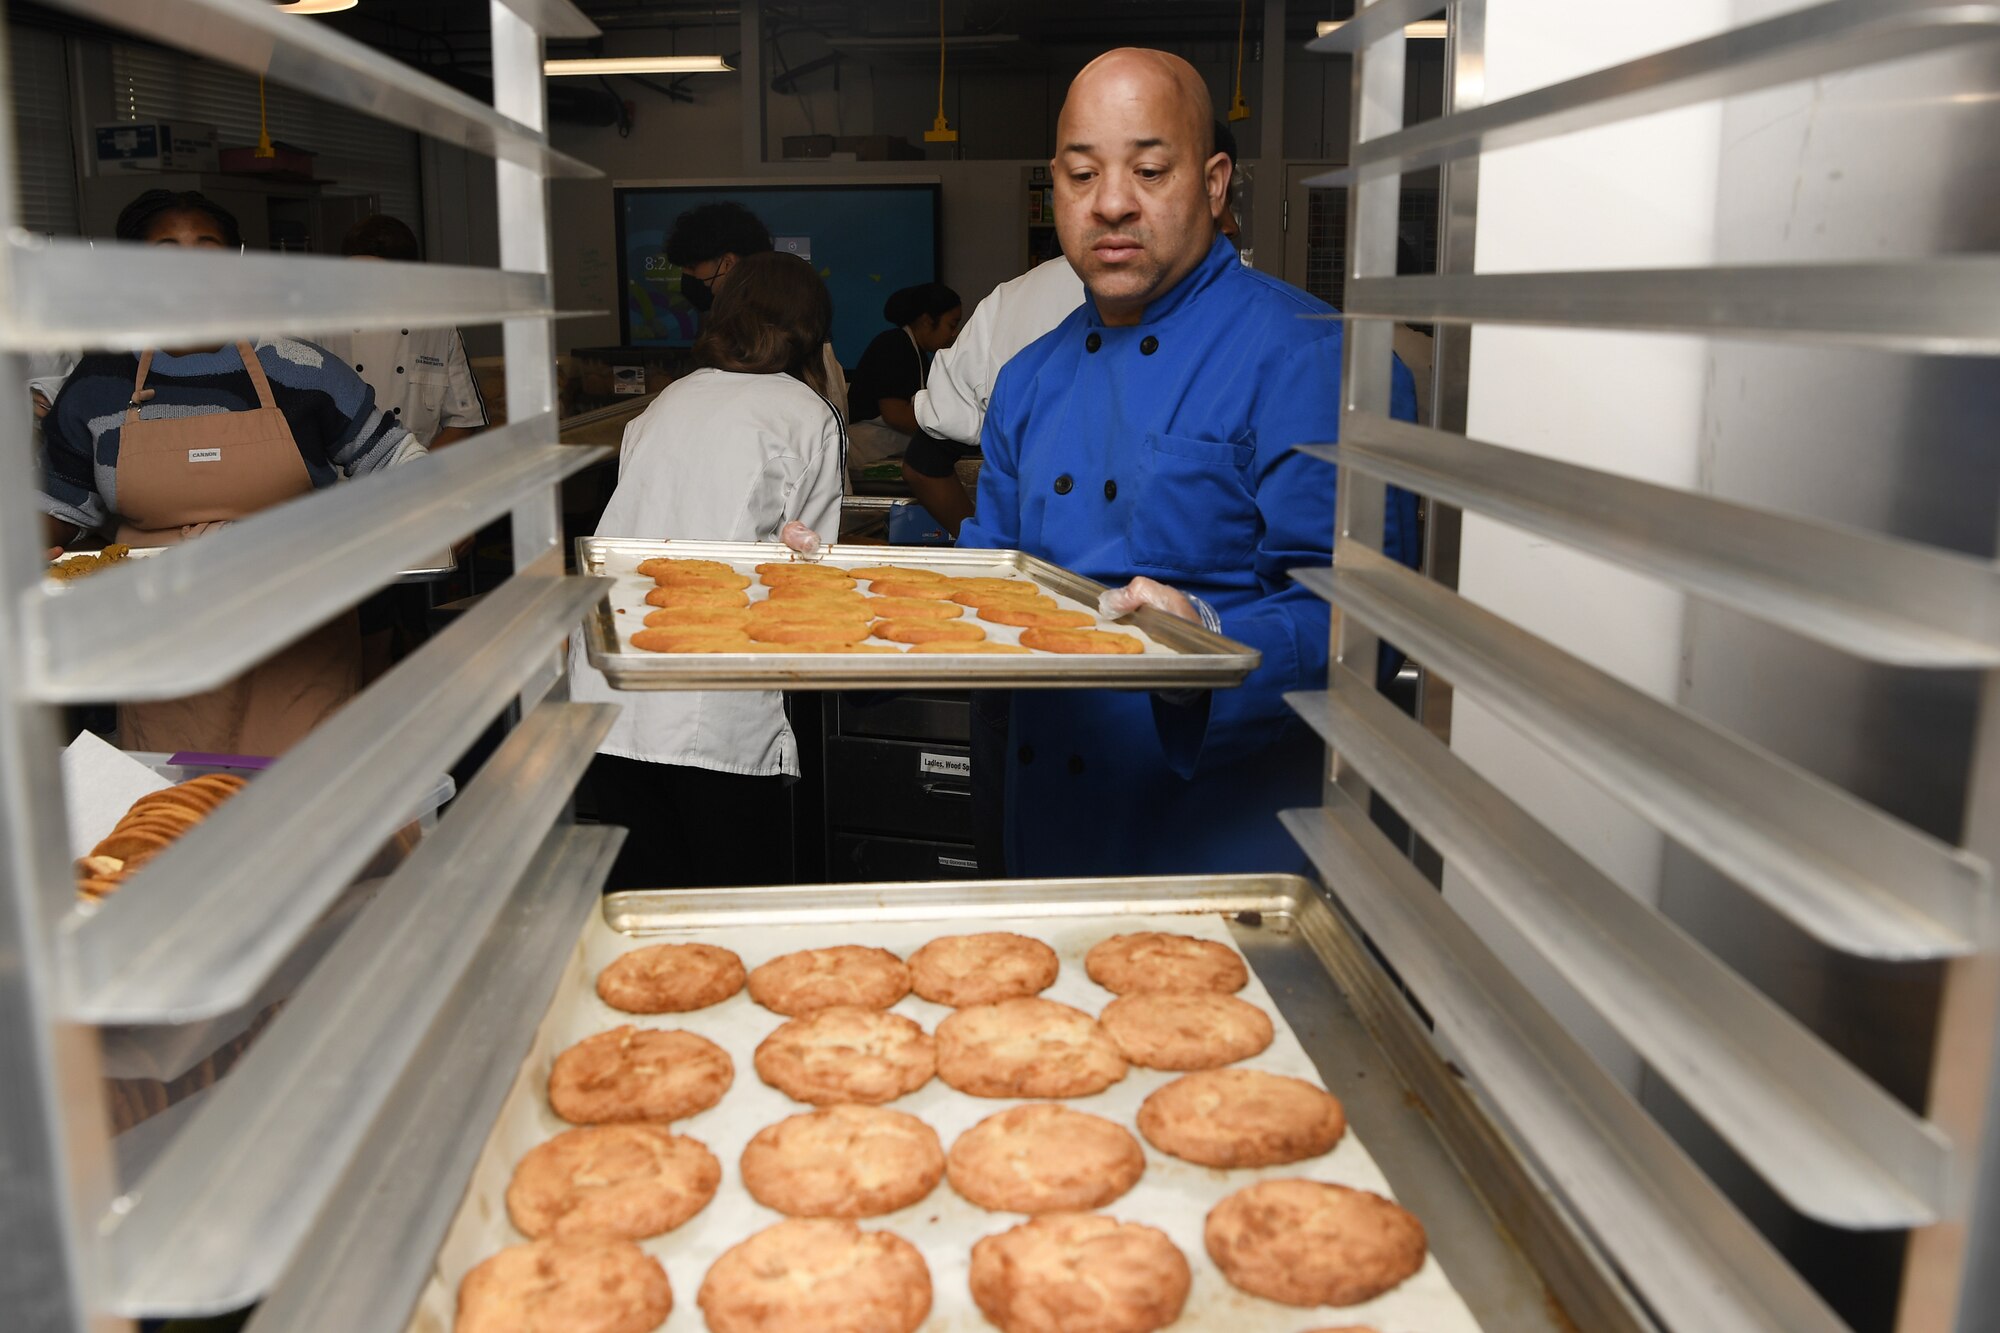 Barry Oxendine, Yokota High School culinary arts teacher, organizes cookie trays in preparation for the base’s annual Yokota Cookie Crunch at the Yokota High School located at Yokota Air Base, Japan, Dec. 8, 2022. Oxendine retired after serving twenty-one years as a culinary specialist in the National Guard and uses his knowledge and passion for cooking to teach his students. (U.S. Air Force photo by Tech. Sgt. Christopher Hubenthal)